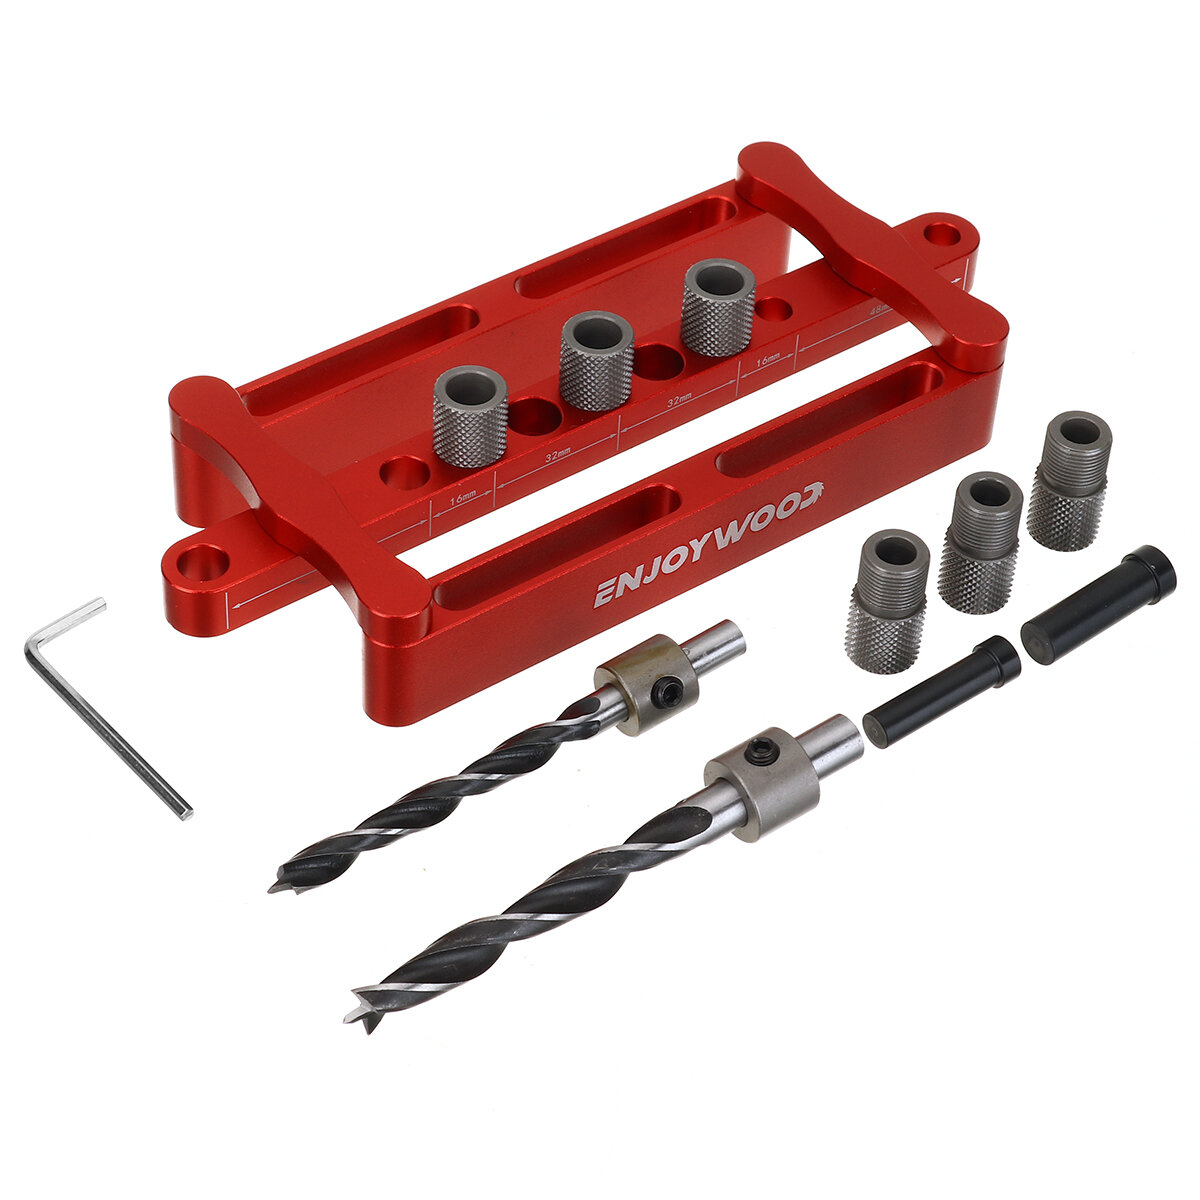 ENJOYWOOD X320 Self Centering Dowelling Jig Metric Inch Dowel Punch Locator Drilling Tools for Woodworking